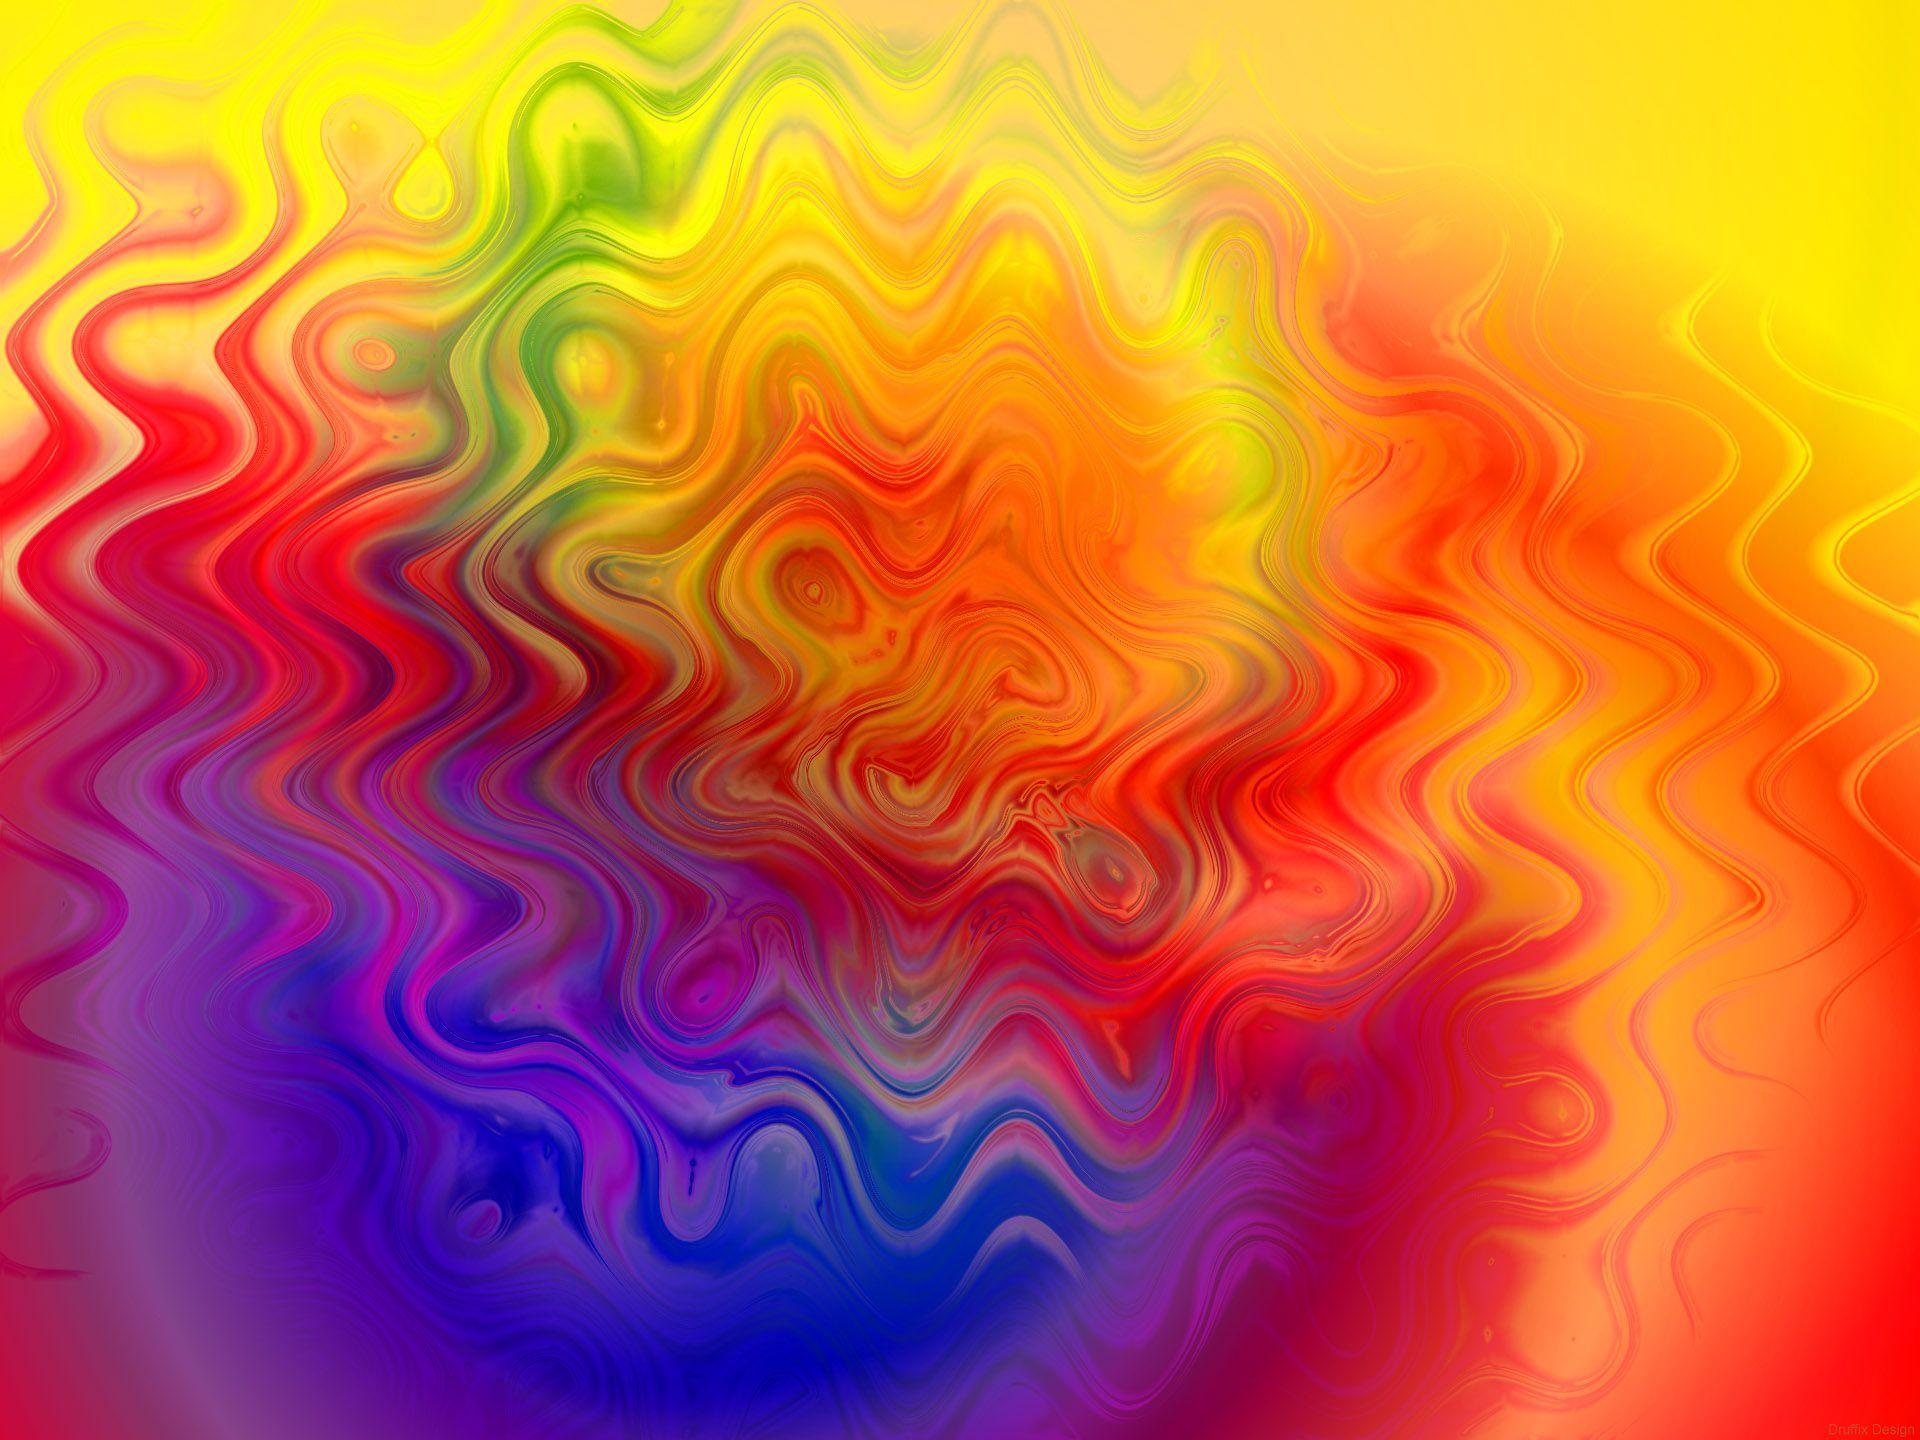 Trippy Background & Psychedelic Wallpaper HD 2016